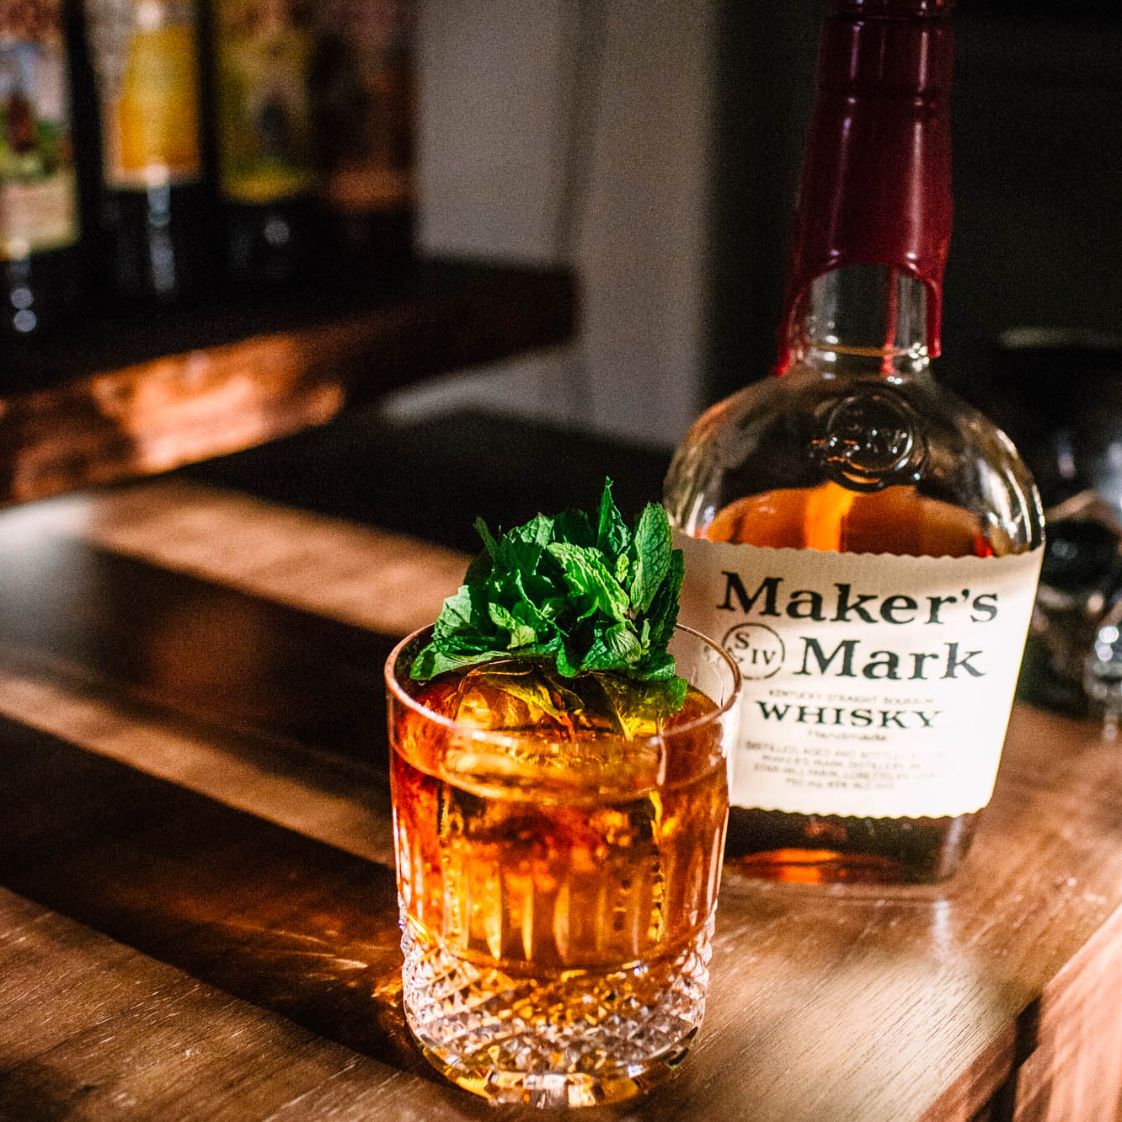 A challenging Old Fashioned that is still approachable to the average drinker.